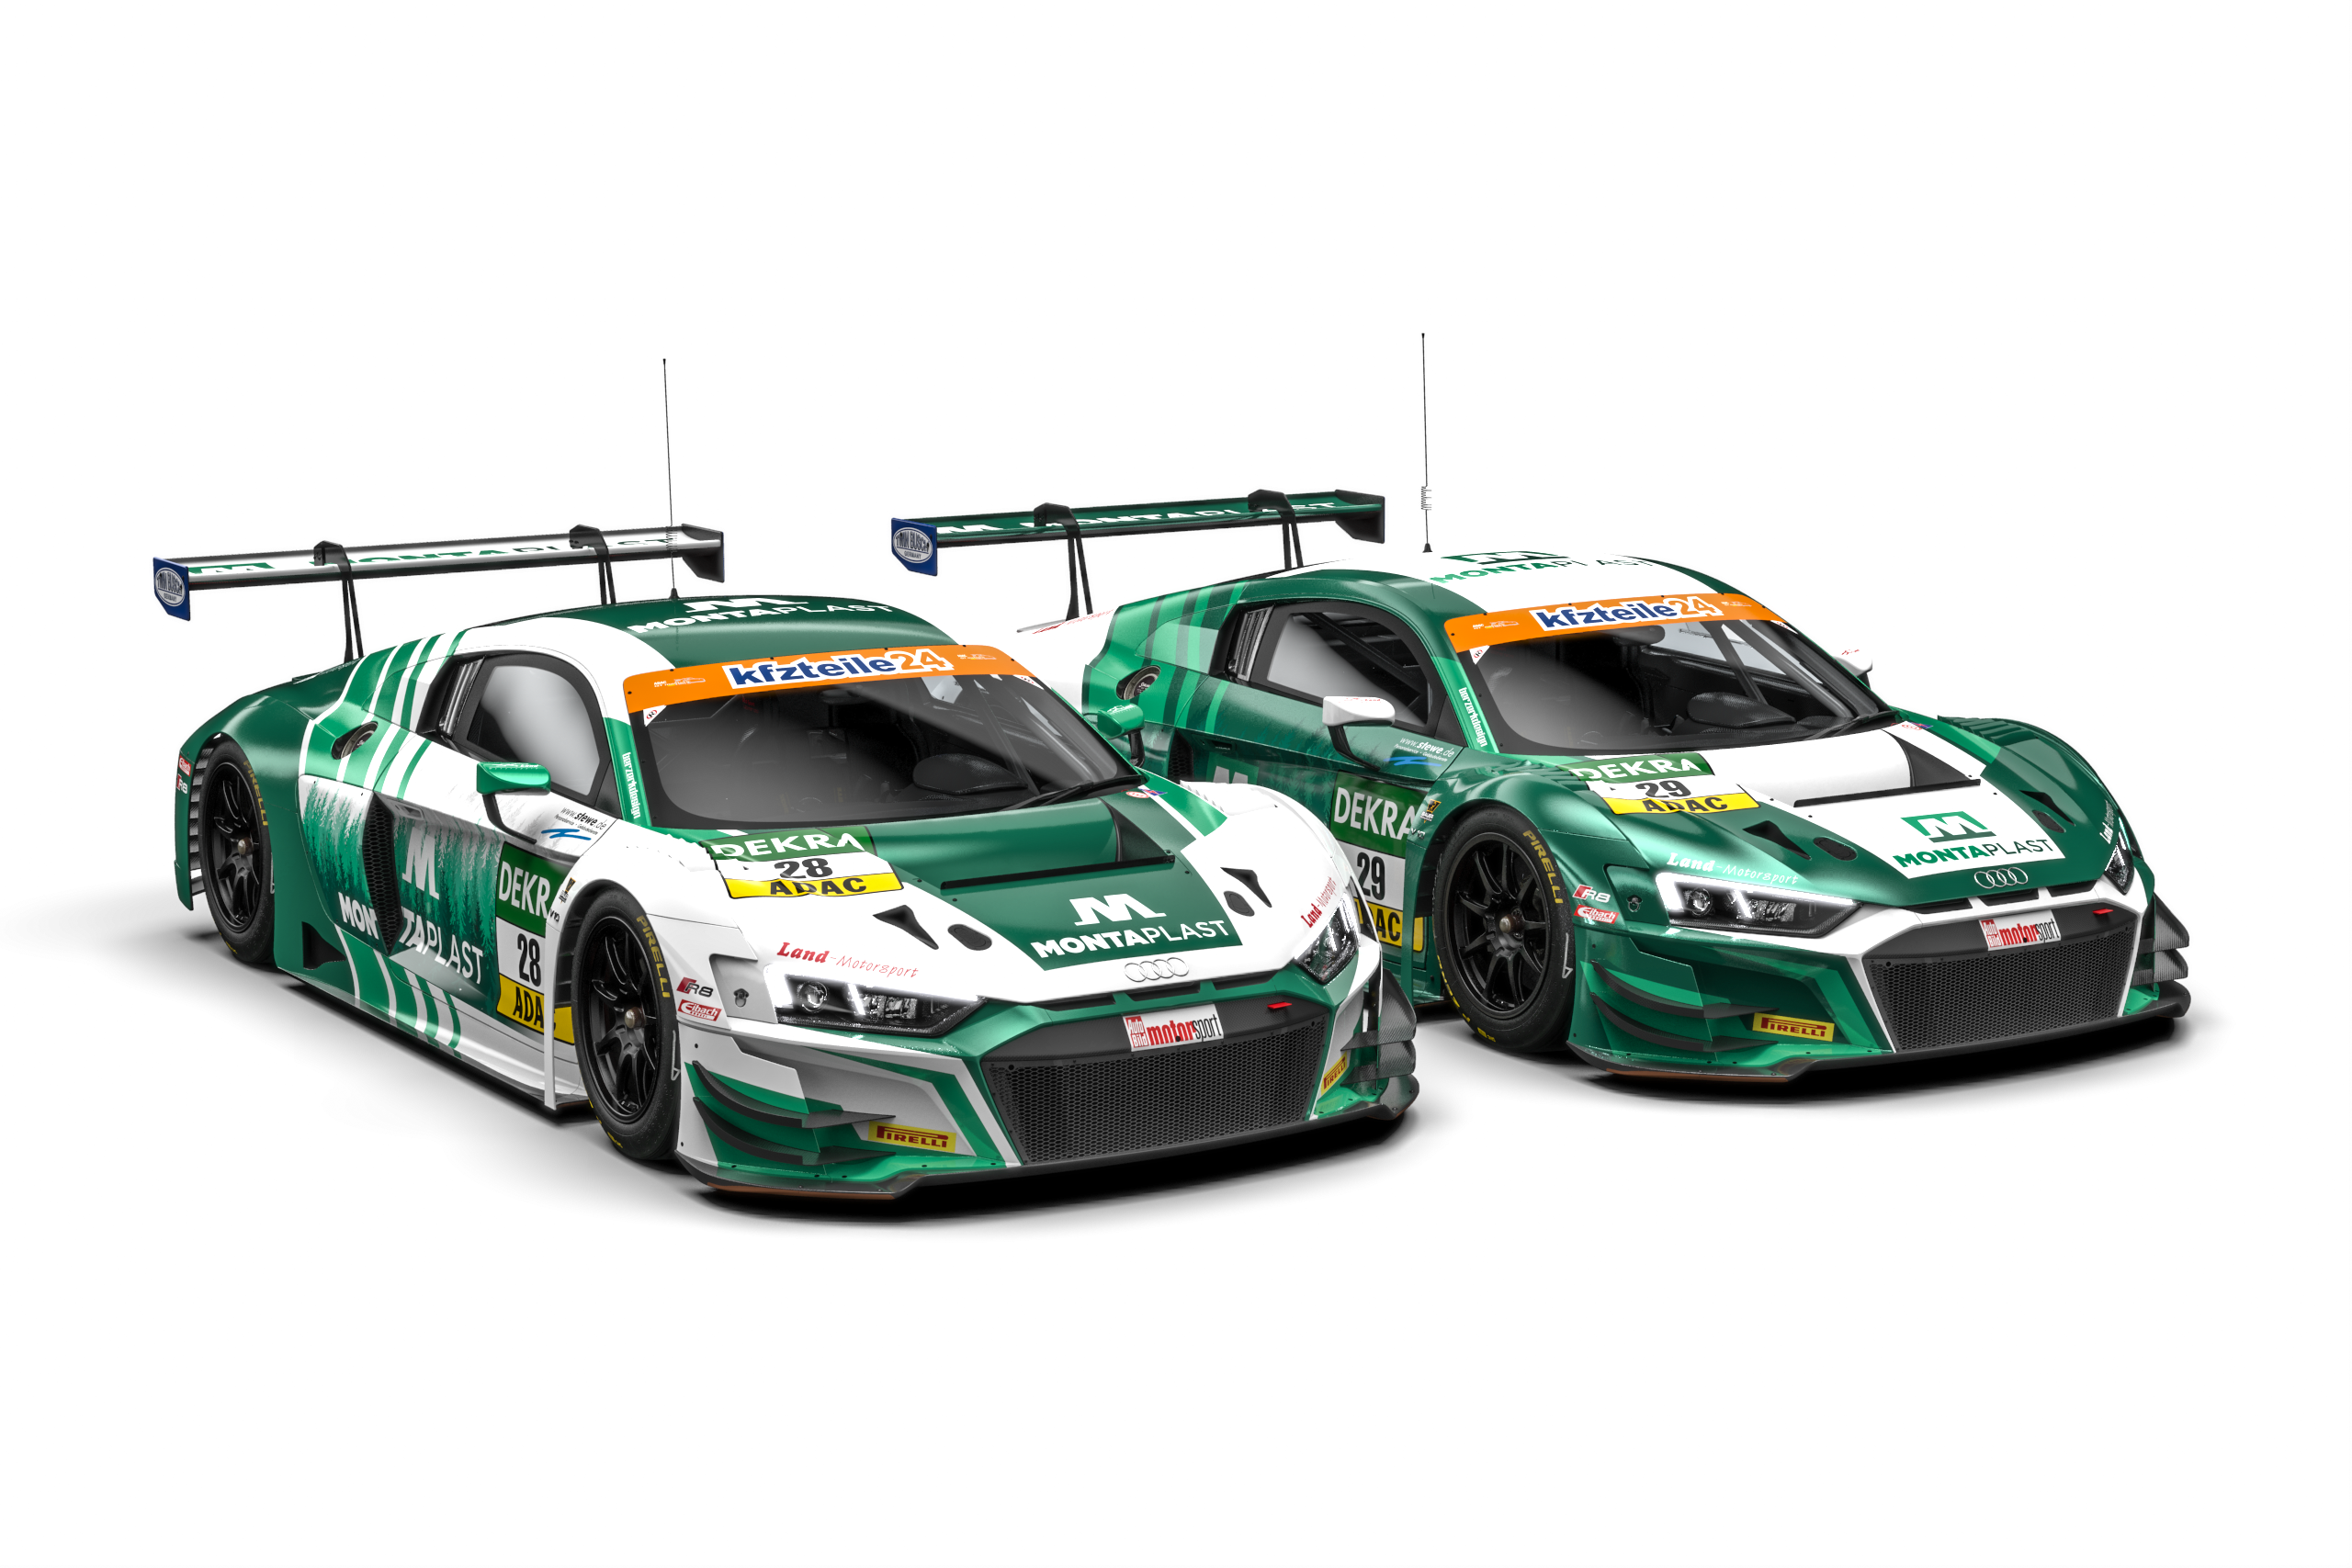 Strong driver quartet for fourth ADAC GT Masters season – Land